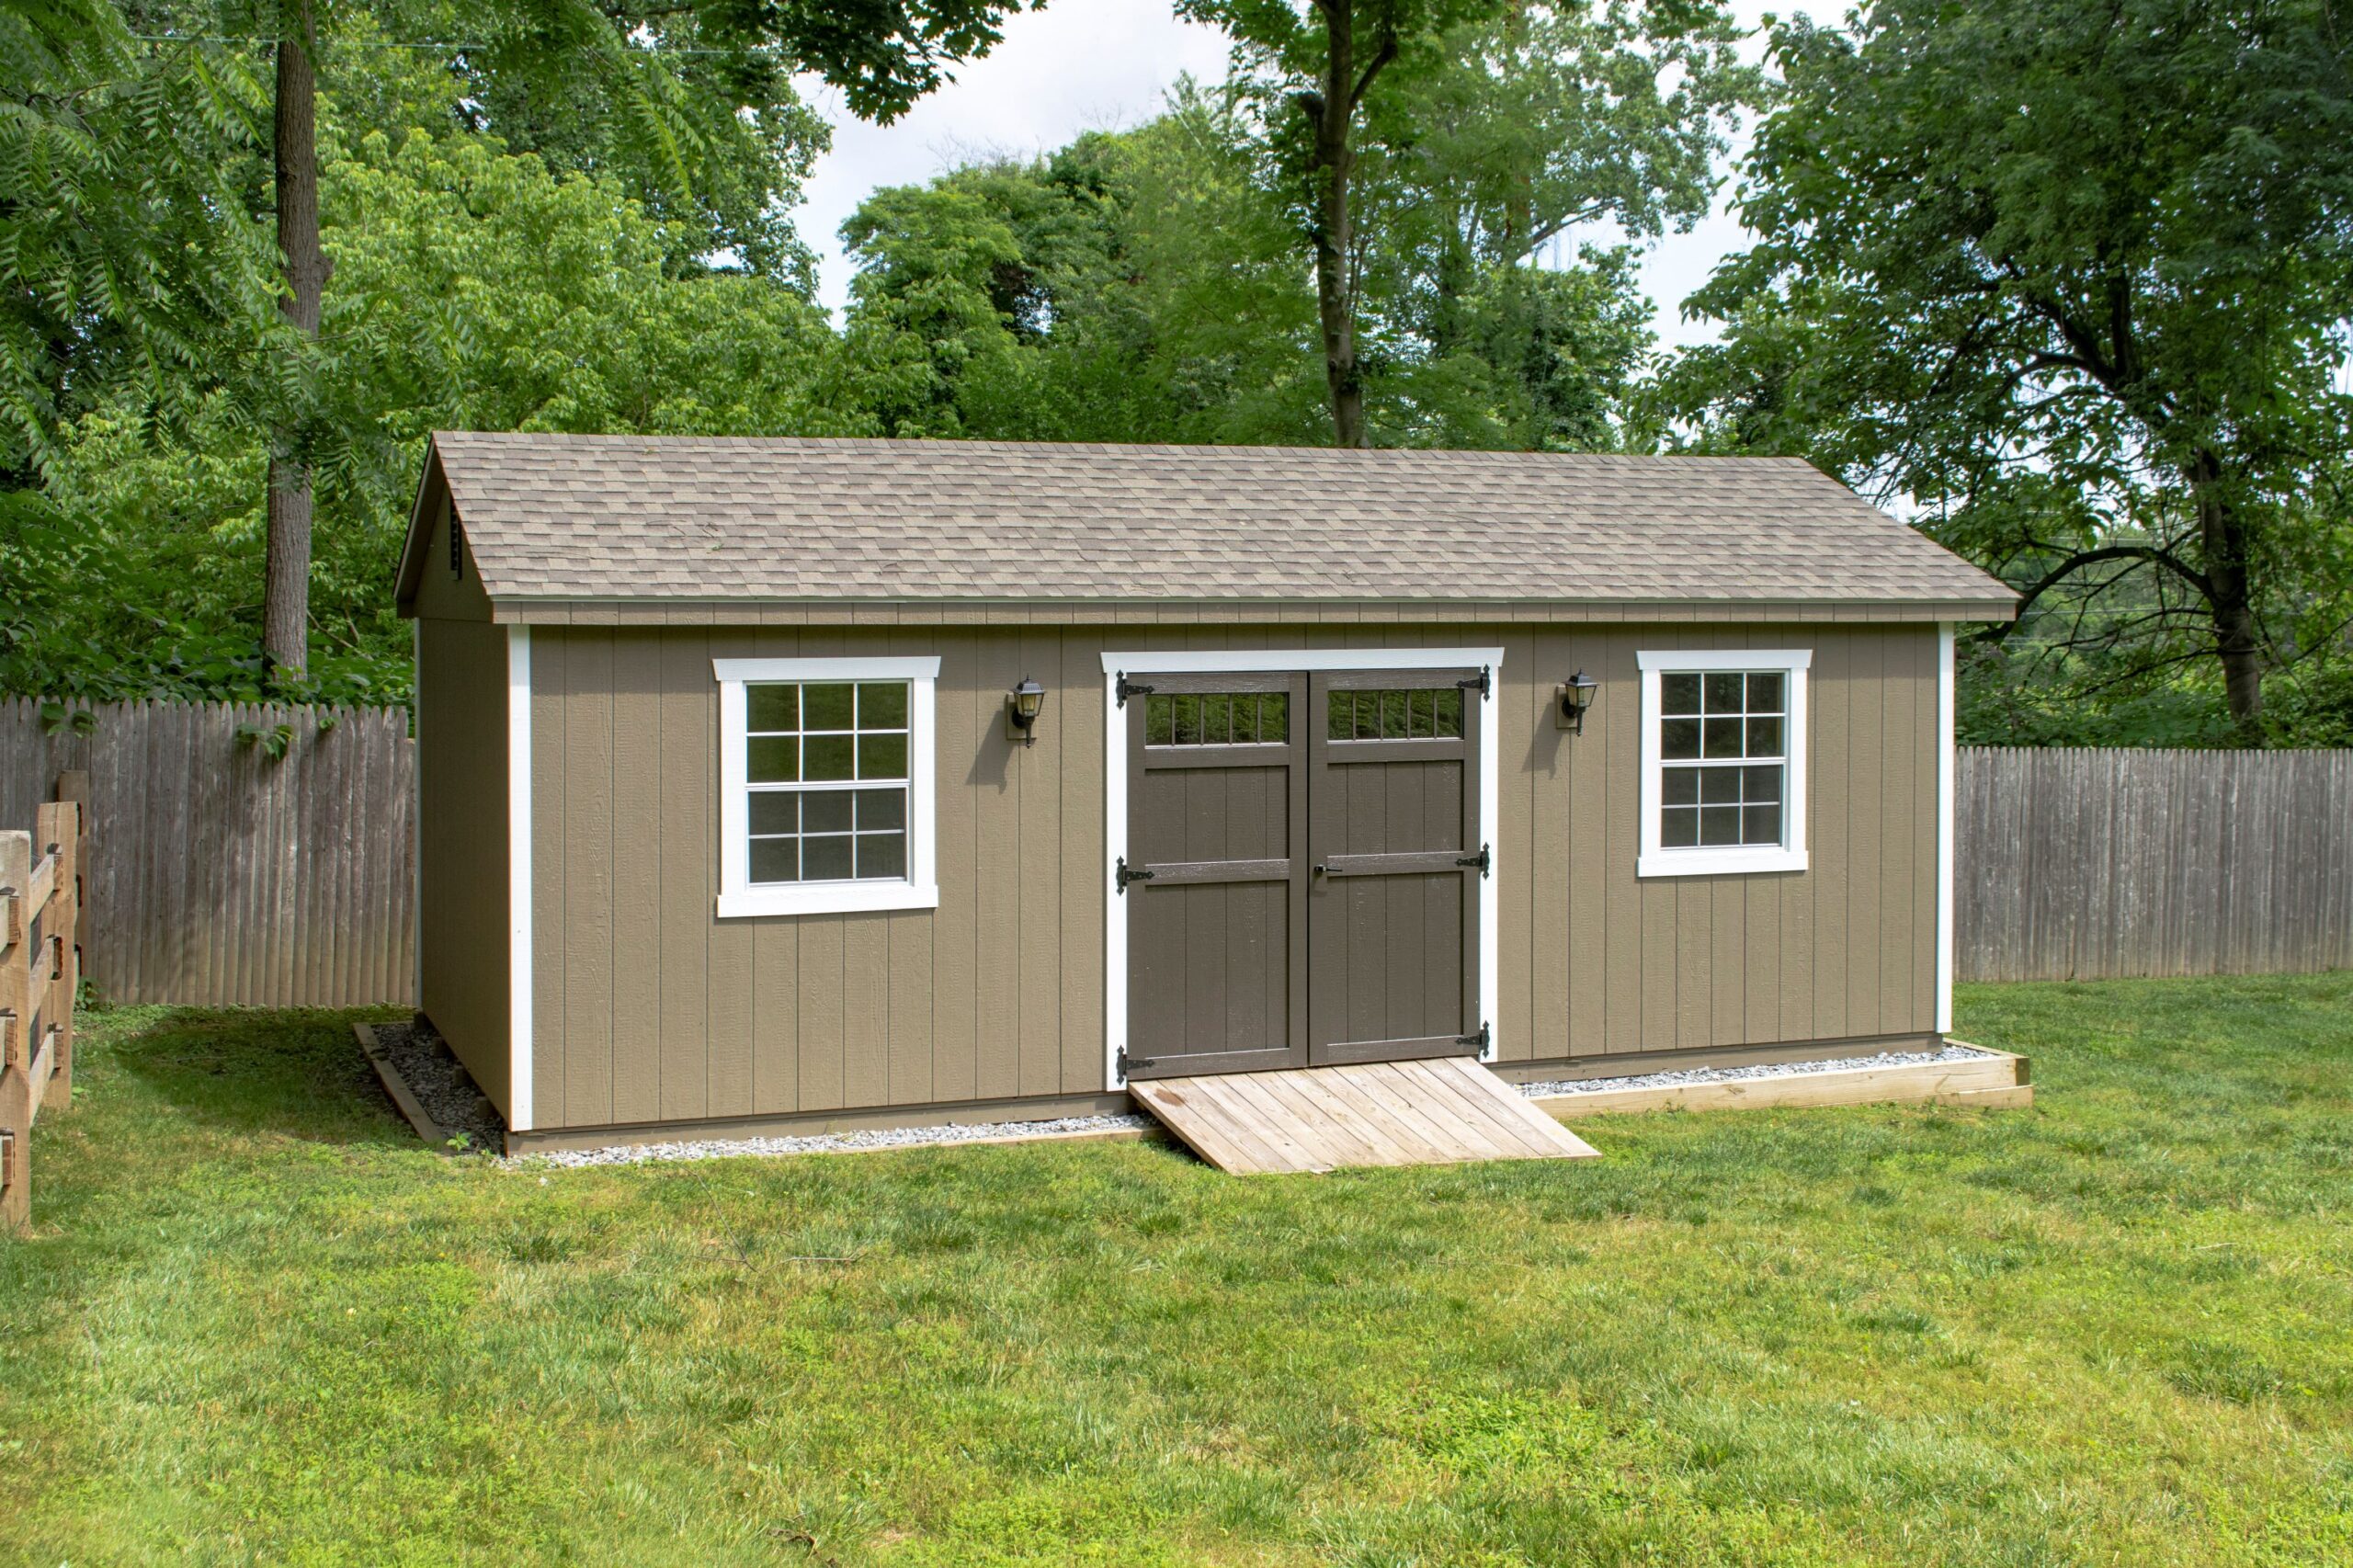 Exterior of a 1-car A-Frame Garage with brown siding and white trim.